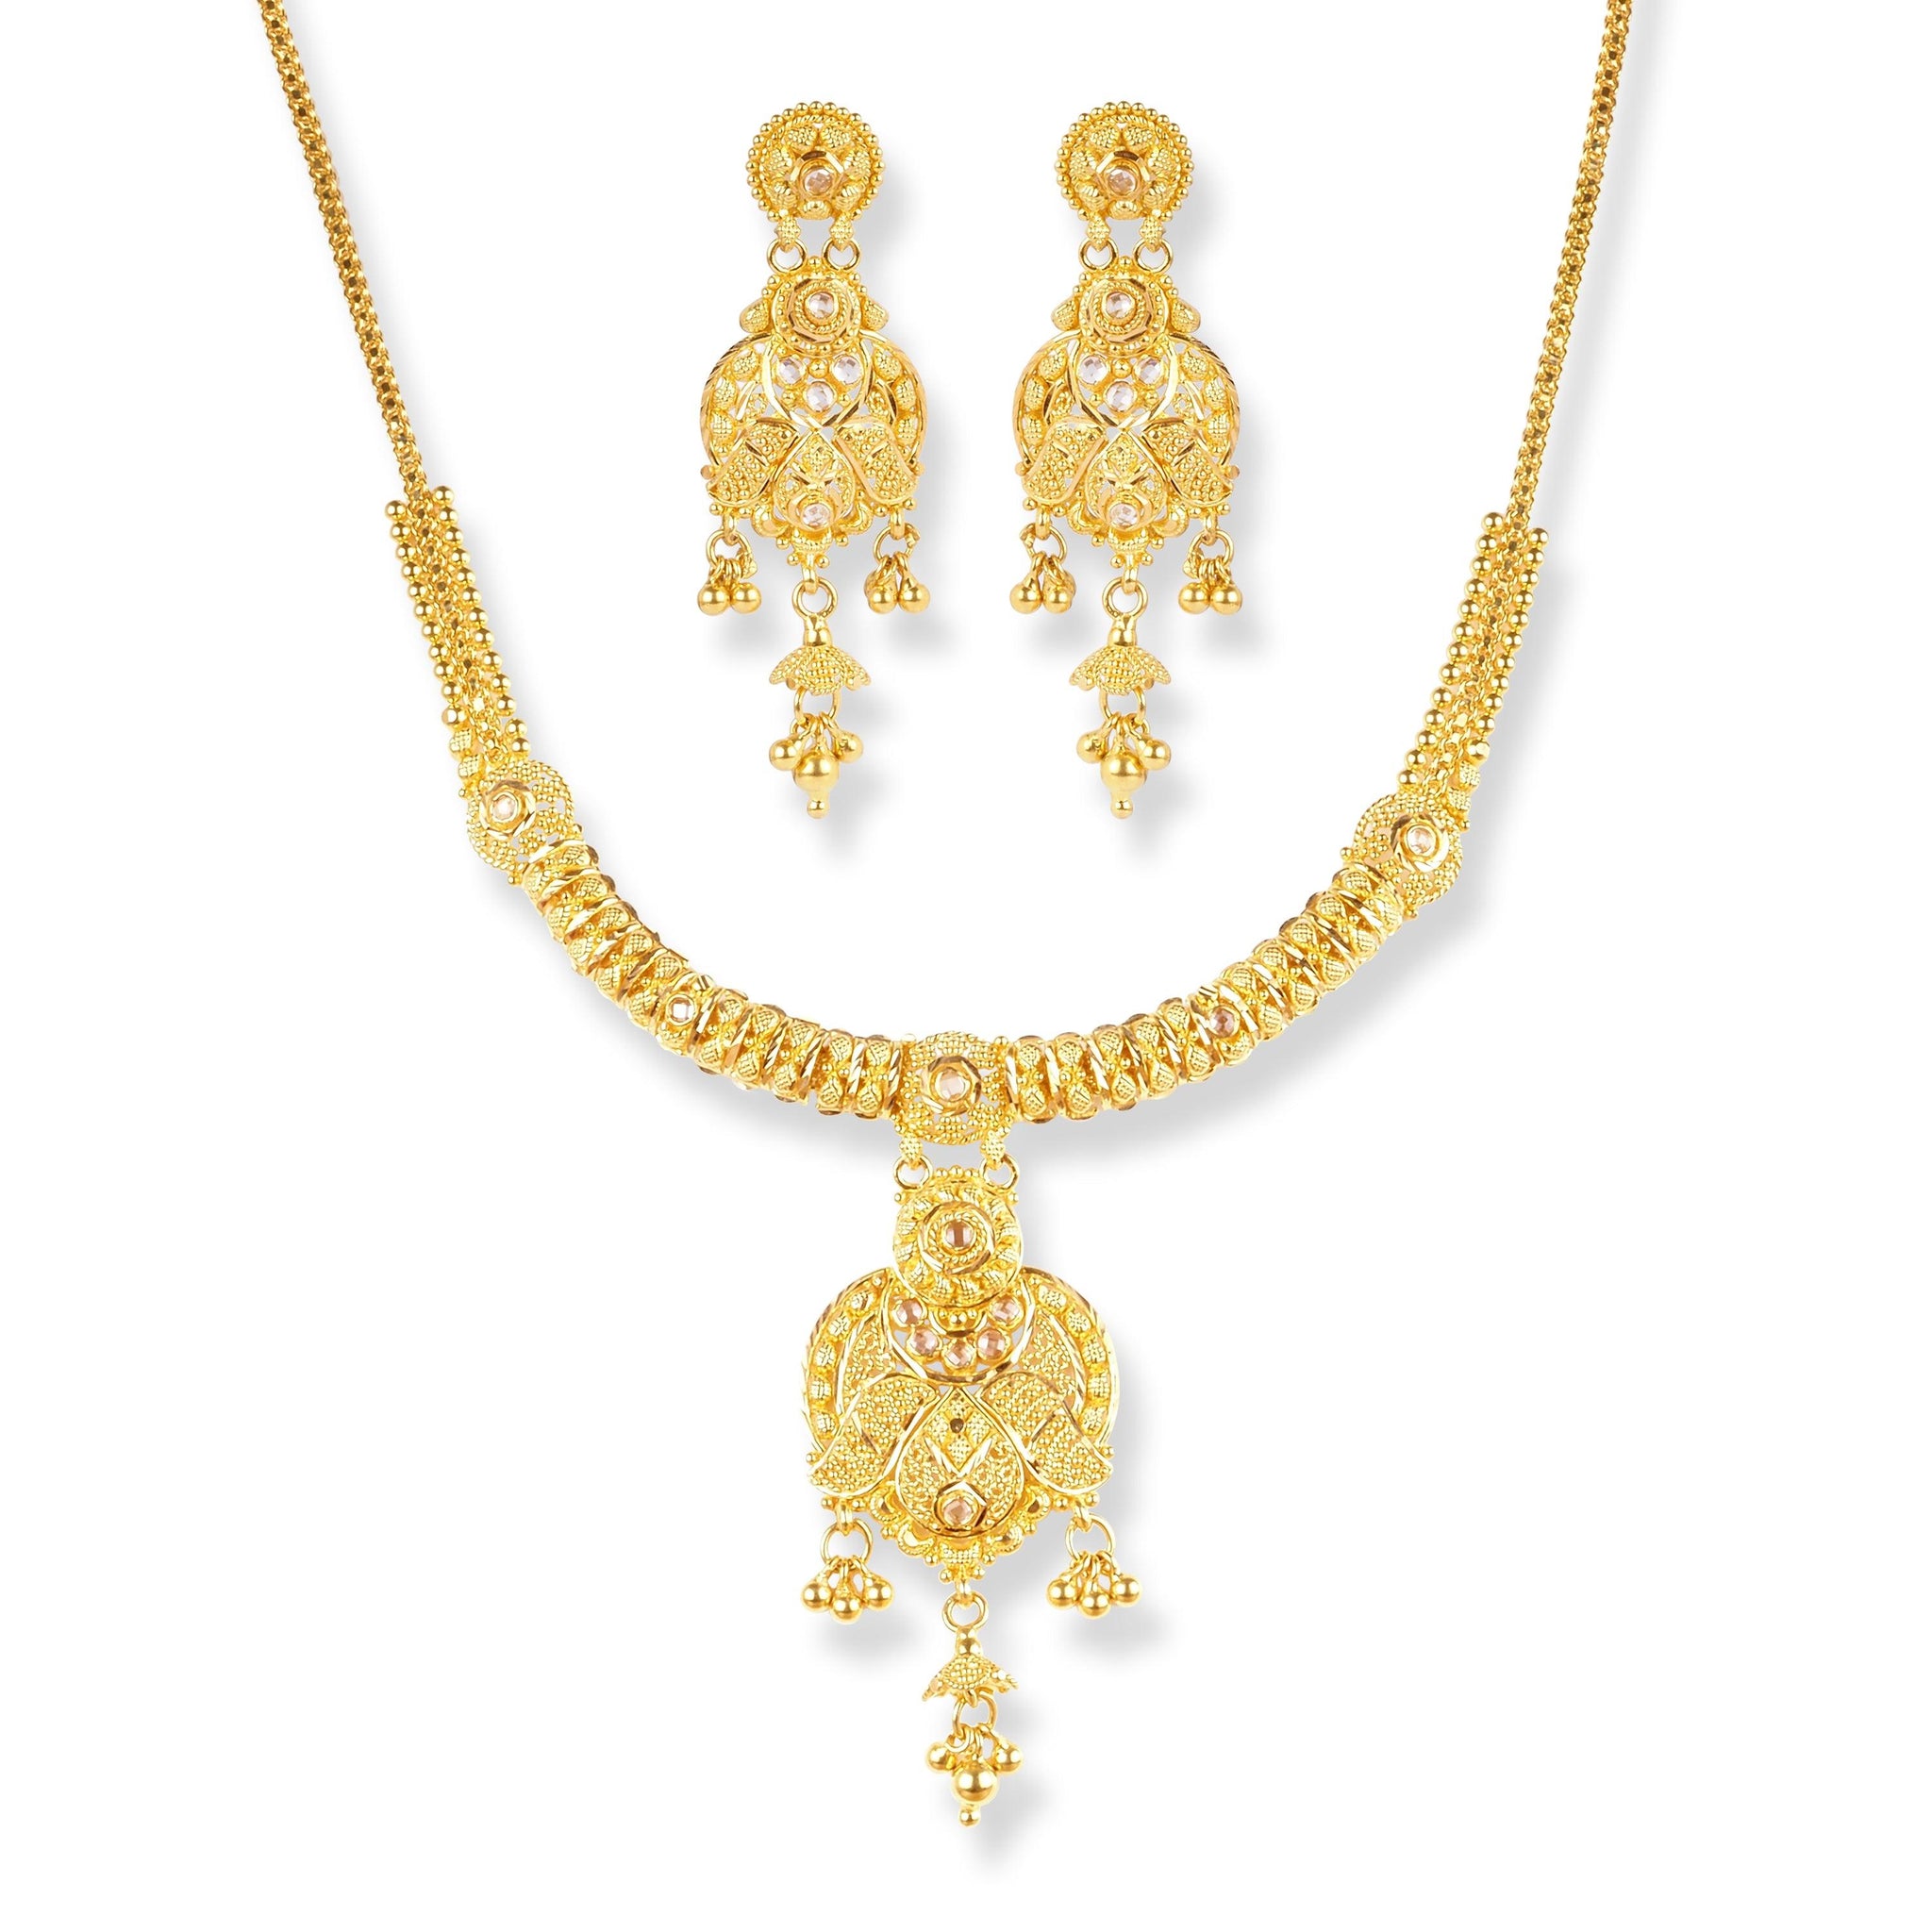 22ct Gold Set with Cubic Zirconia Stones (Necklace + Earrings) NE-5948